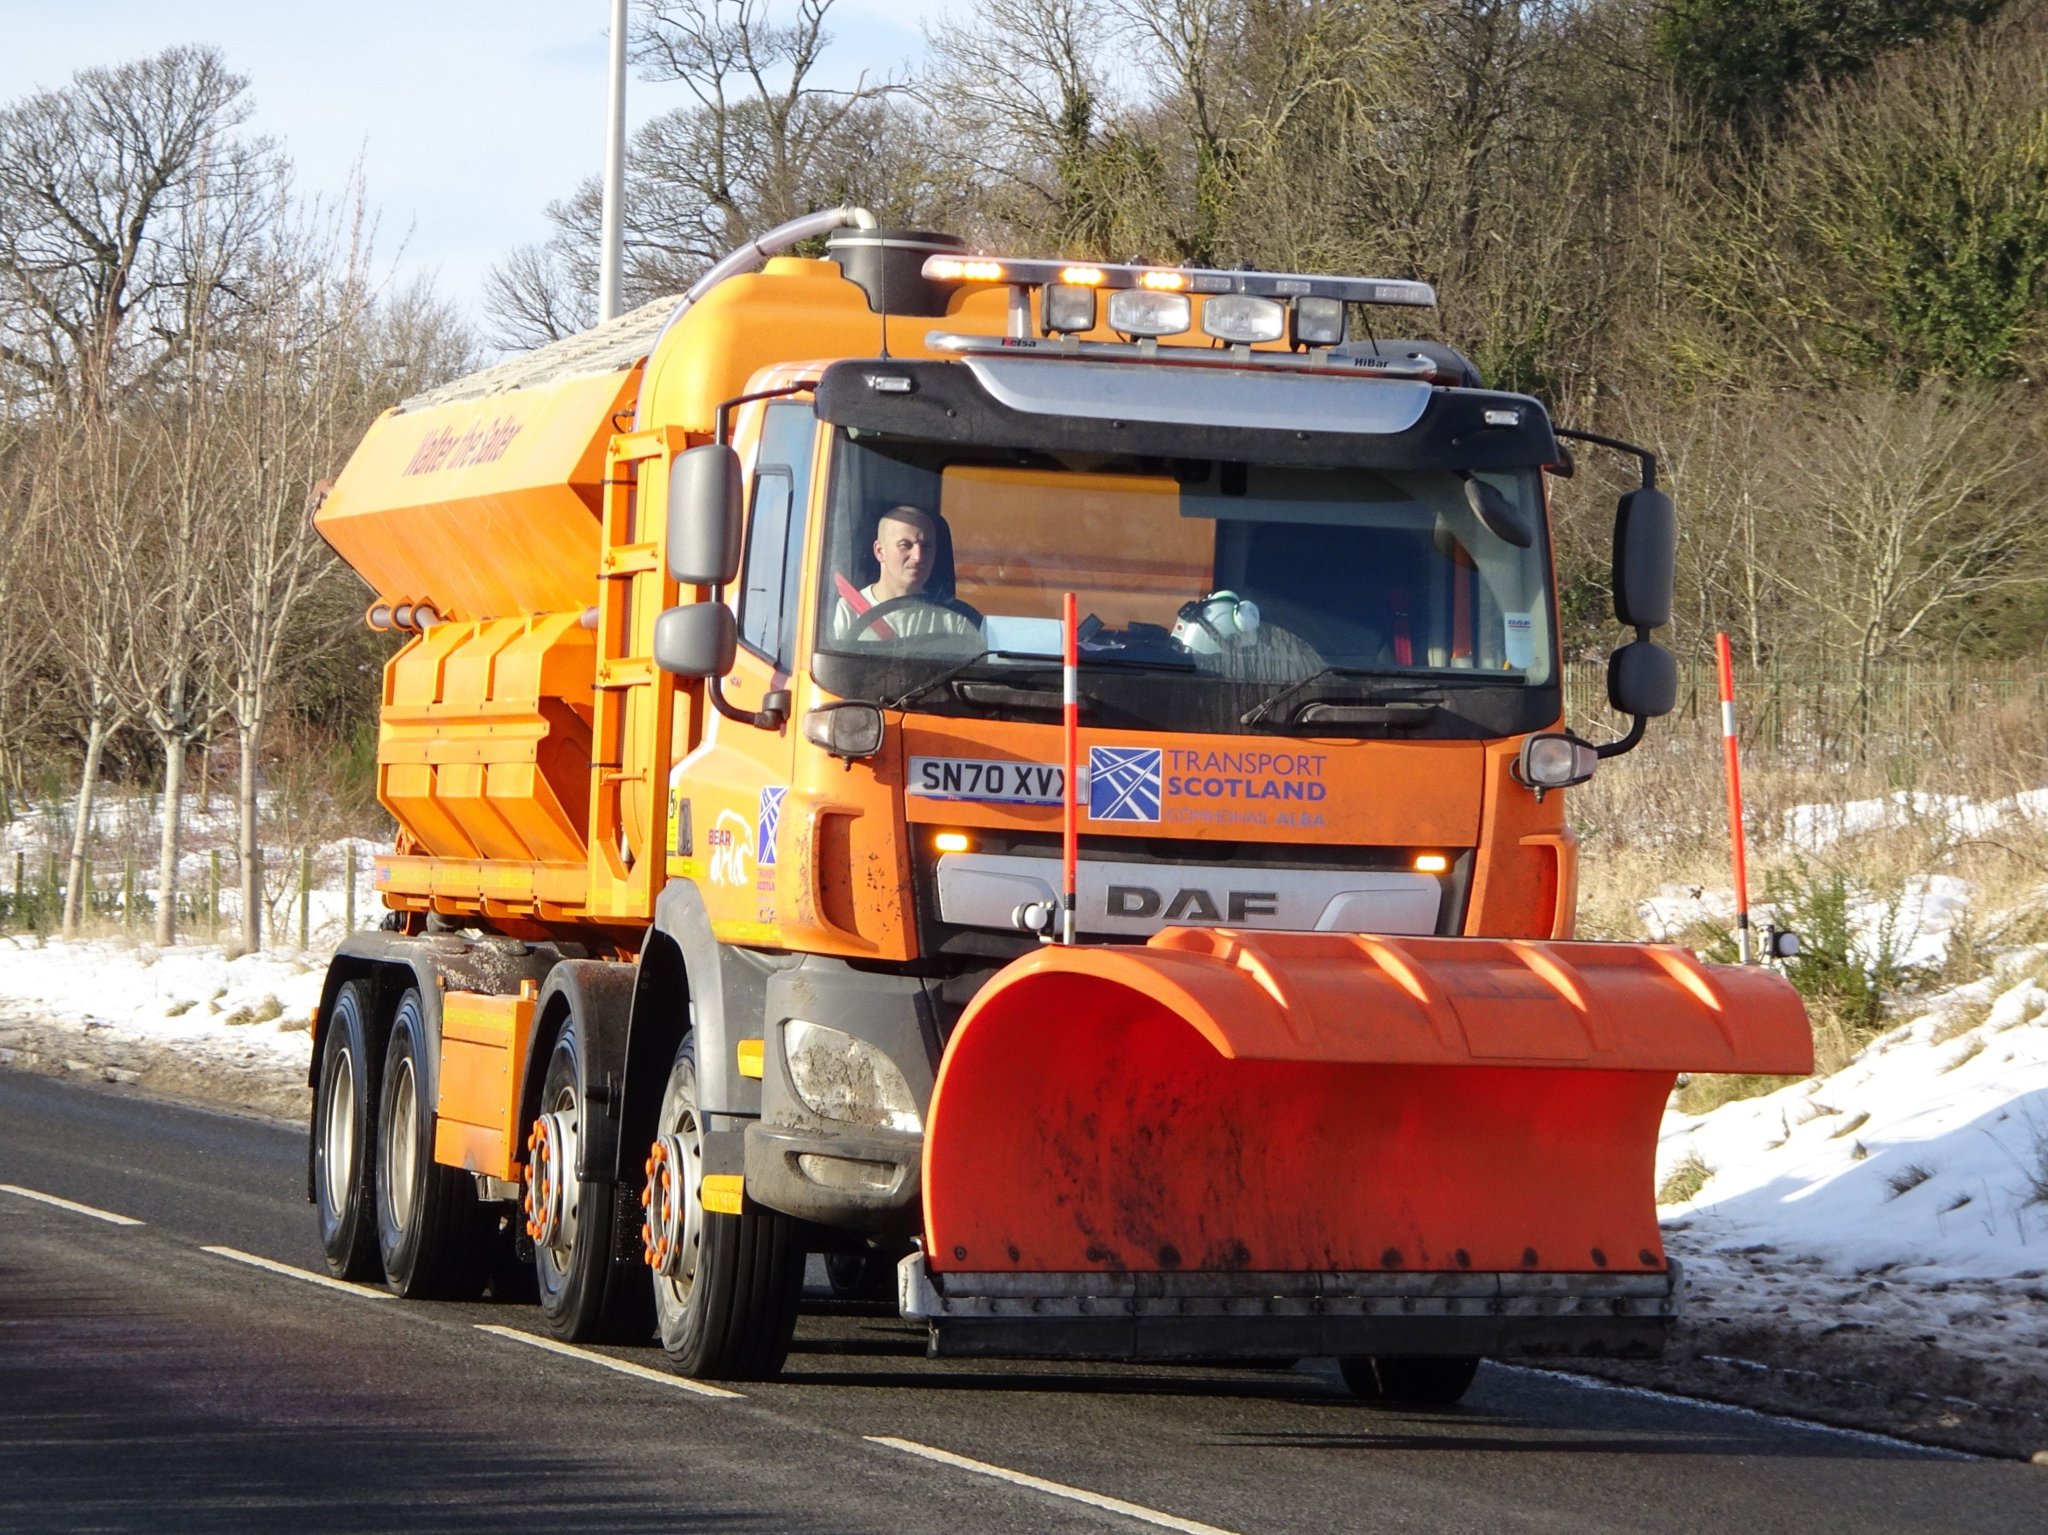 Winter Maintenance Service gets underway on A92 from Dundee to Arbroath